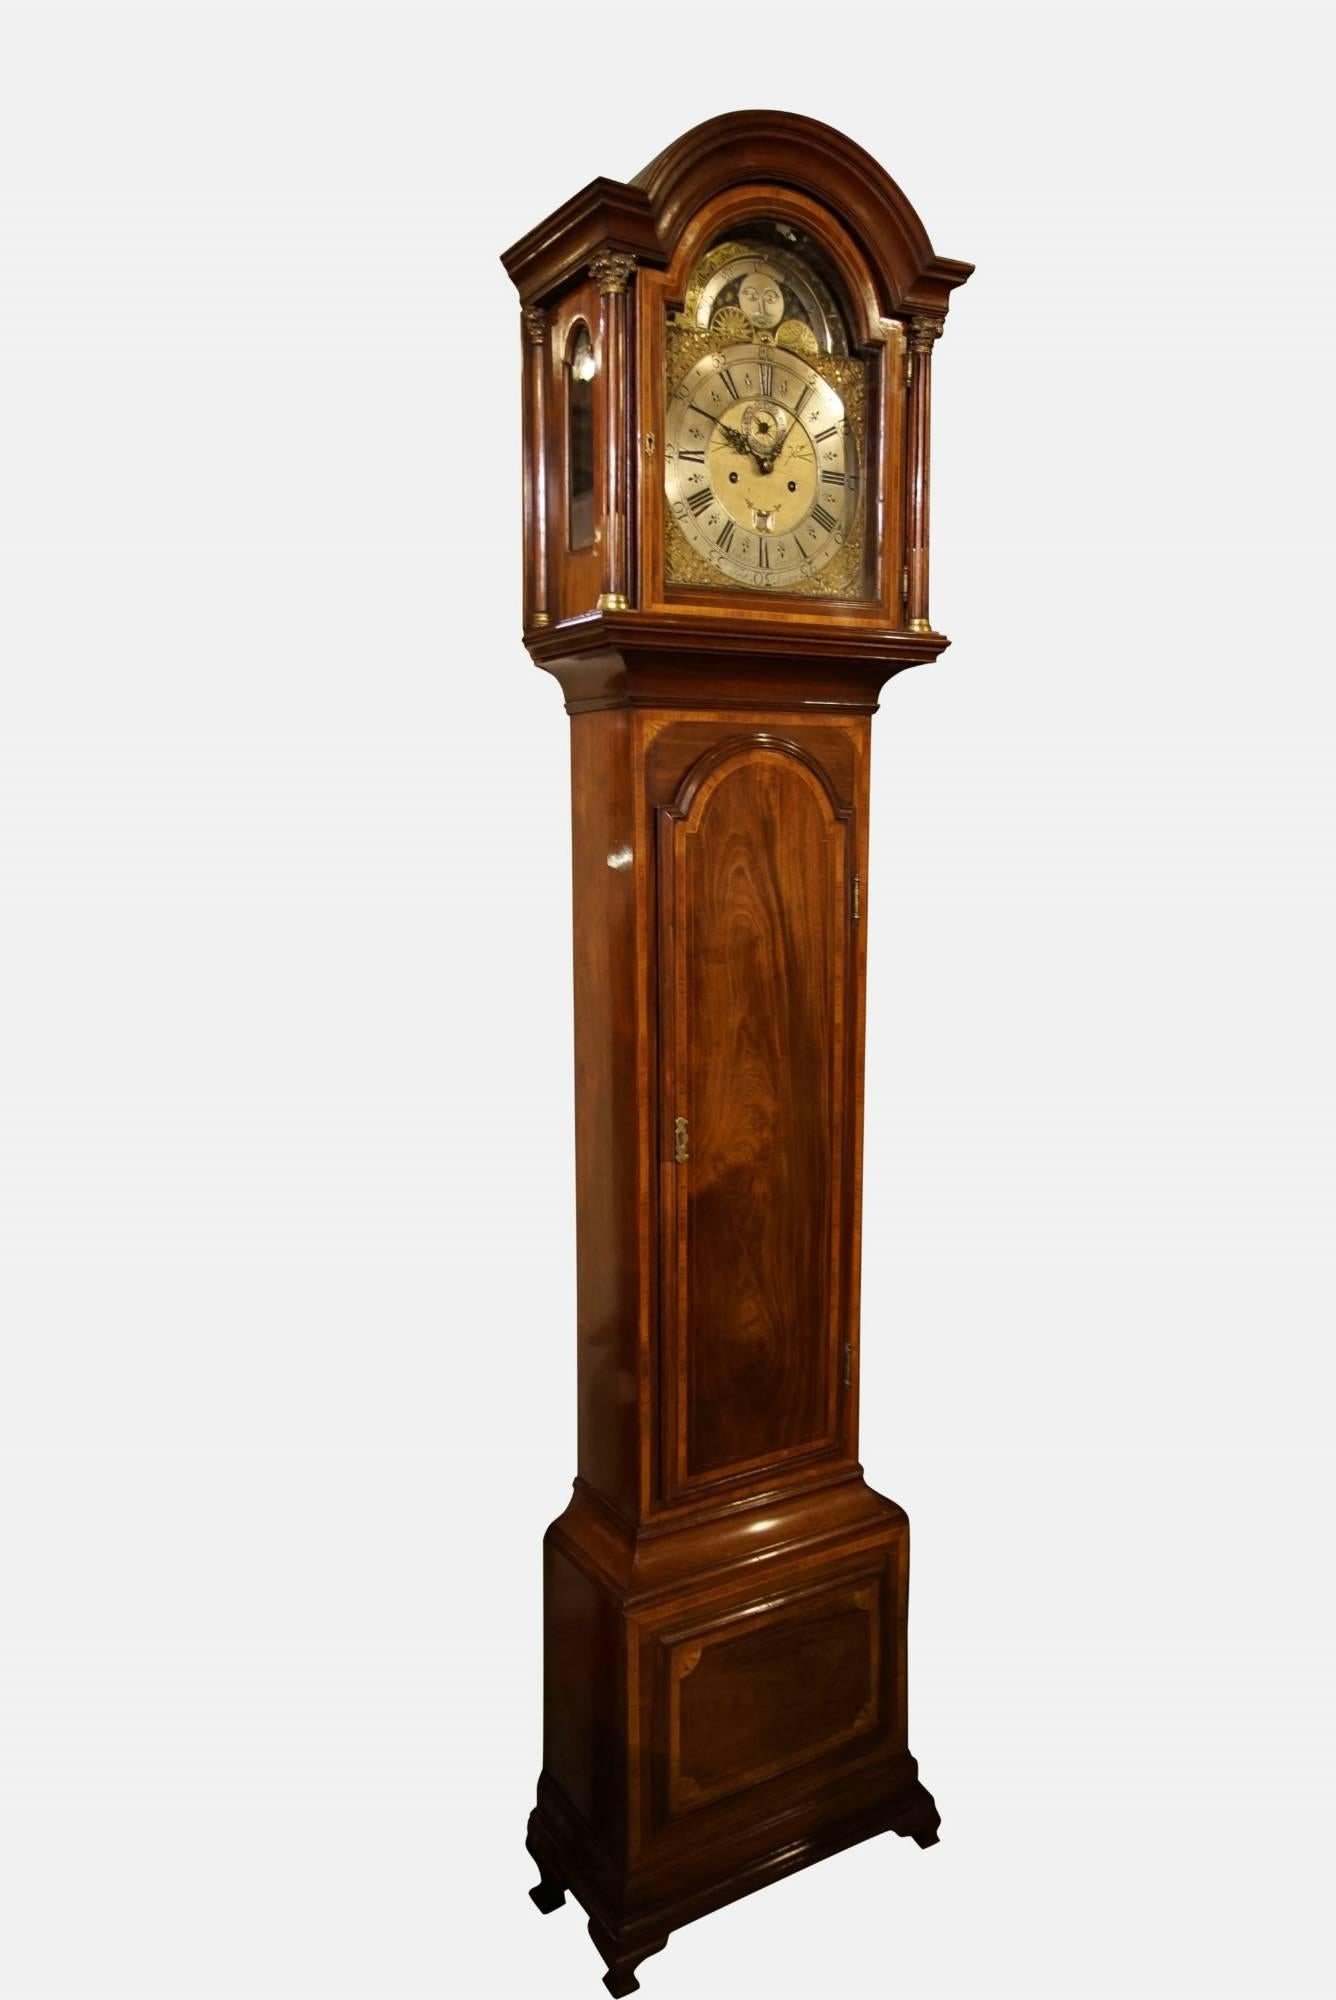 A superb mahogany, tulip wood crossbanded arched dial 8 day longcase clock with a revolving moon phase to the arch by Christopher Locket, Tetbury,
Overhauled and in good working order 

circa 1780

Dial dimensions:

42cm high
31cm wide.
 